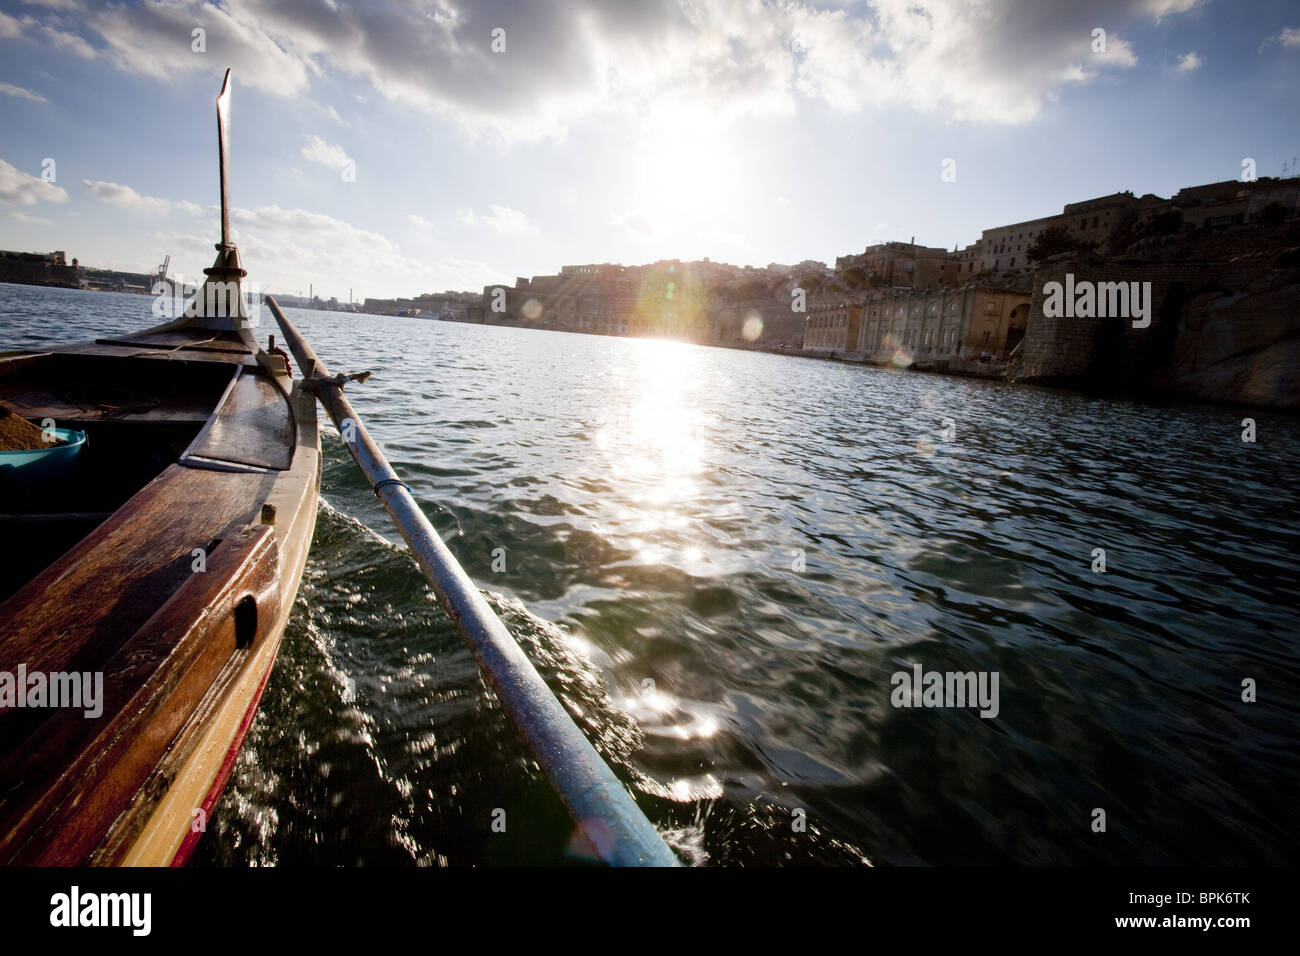 View from a boat at The Grand Harbour of Vallettta and the Three Cities, Malta, Europe Stock Photo